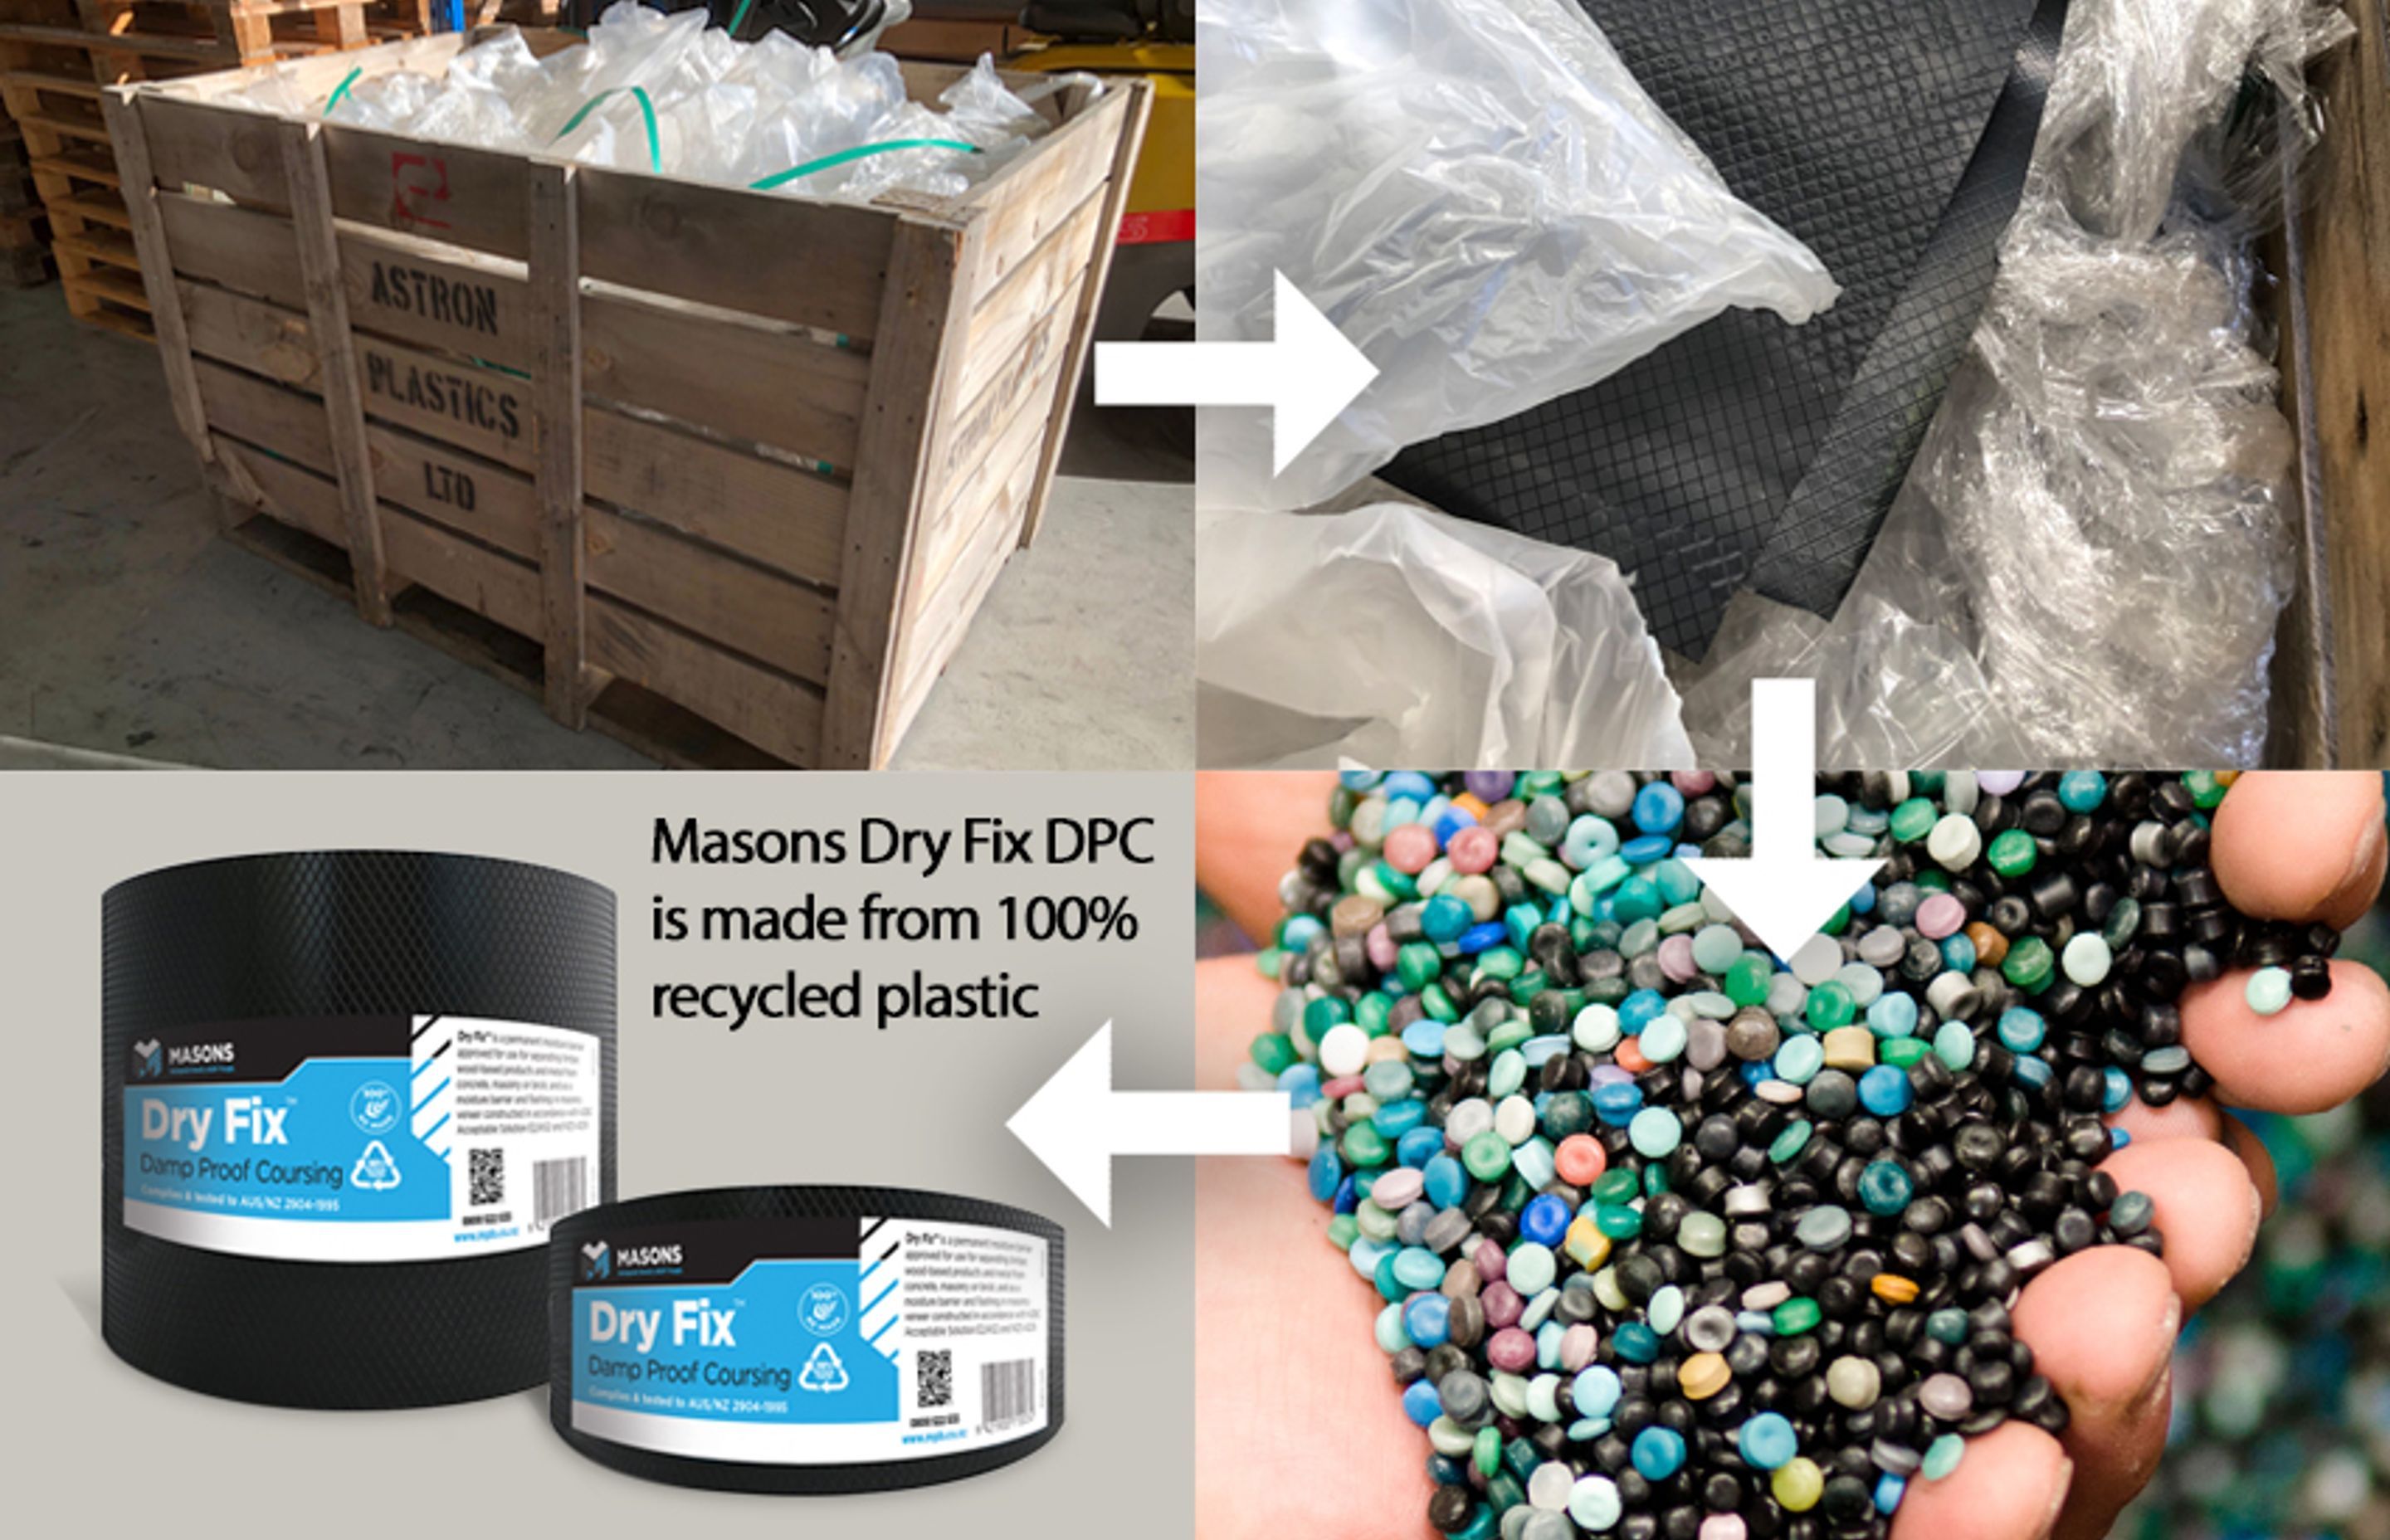 Masons plastic recycling scheme sees clean, soft wrap materials pelletised and made into a range of plastic goods, including Masons Damp Proof Coursing, helping to divert plastic waste from our landfills.